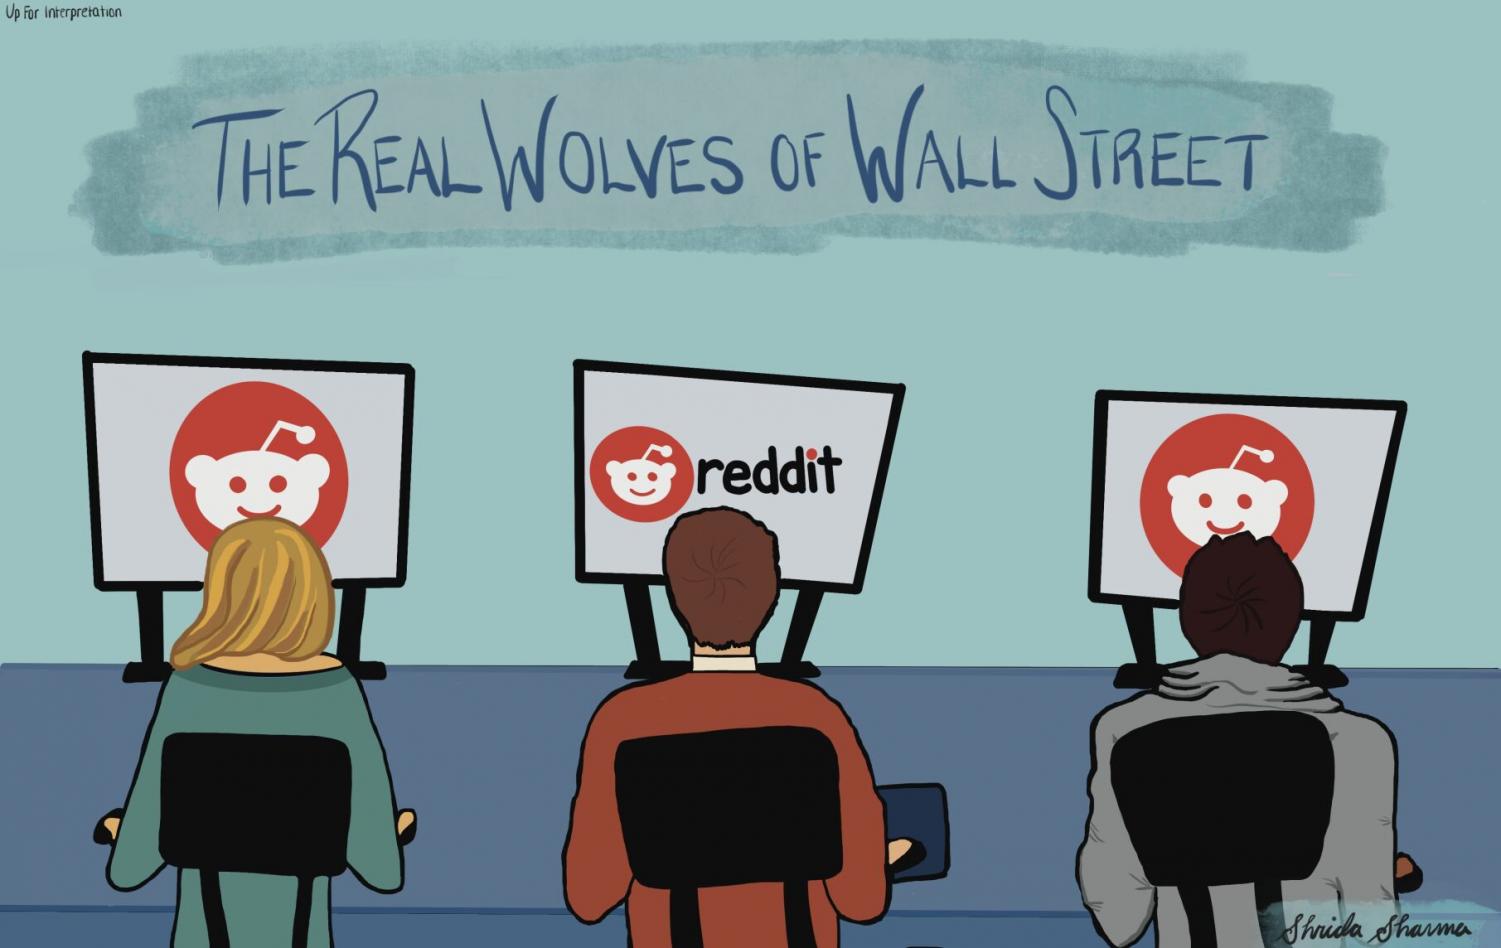 Up For Interpretation: The Real Wolves of Wall Street